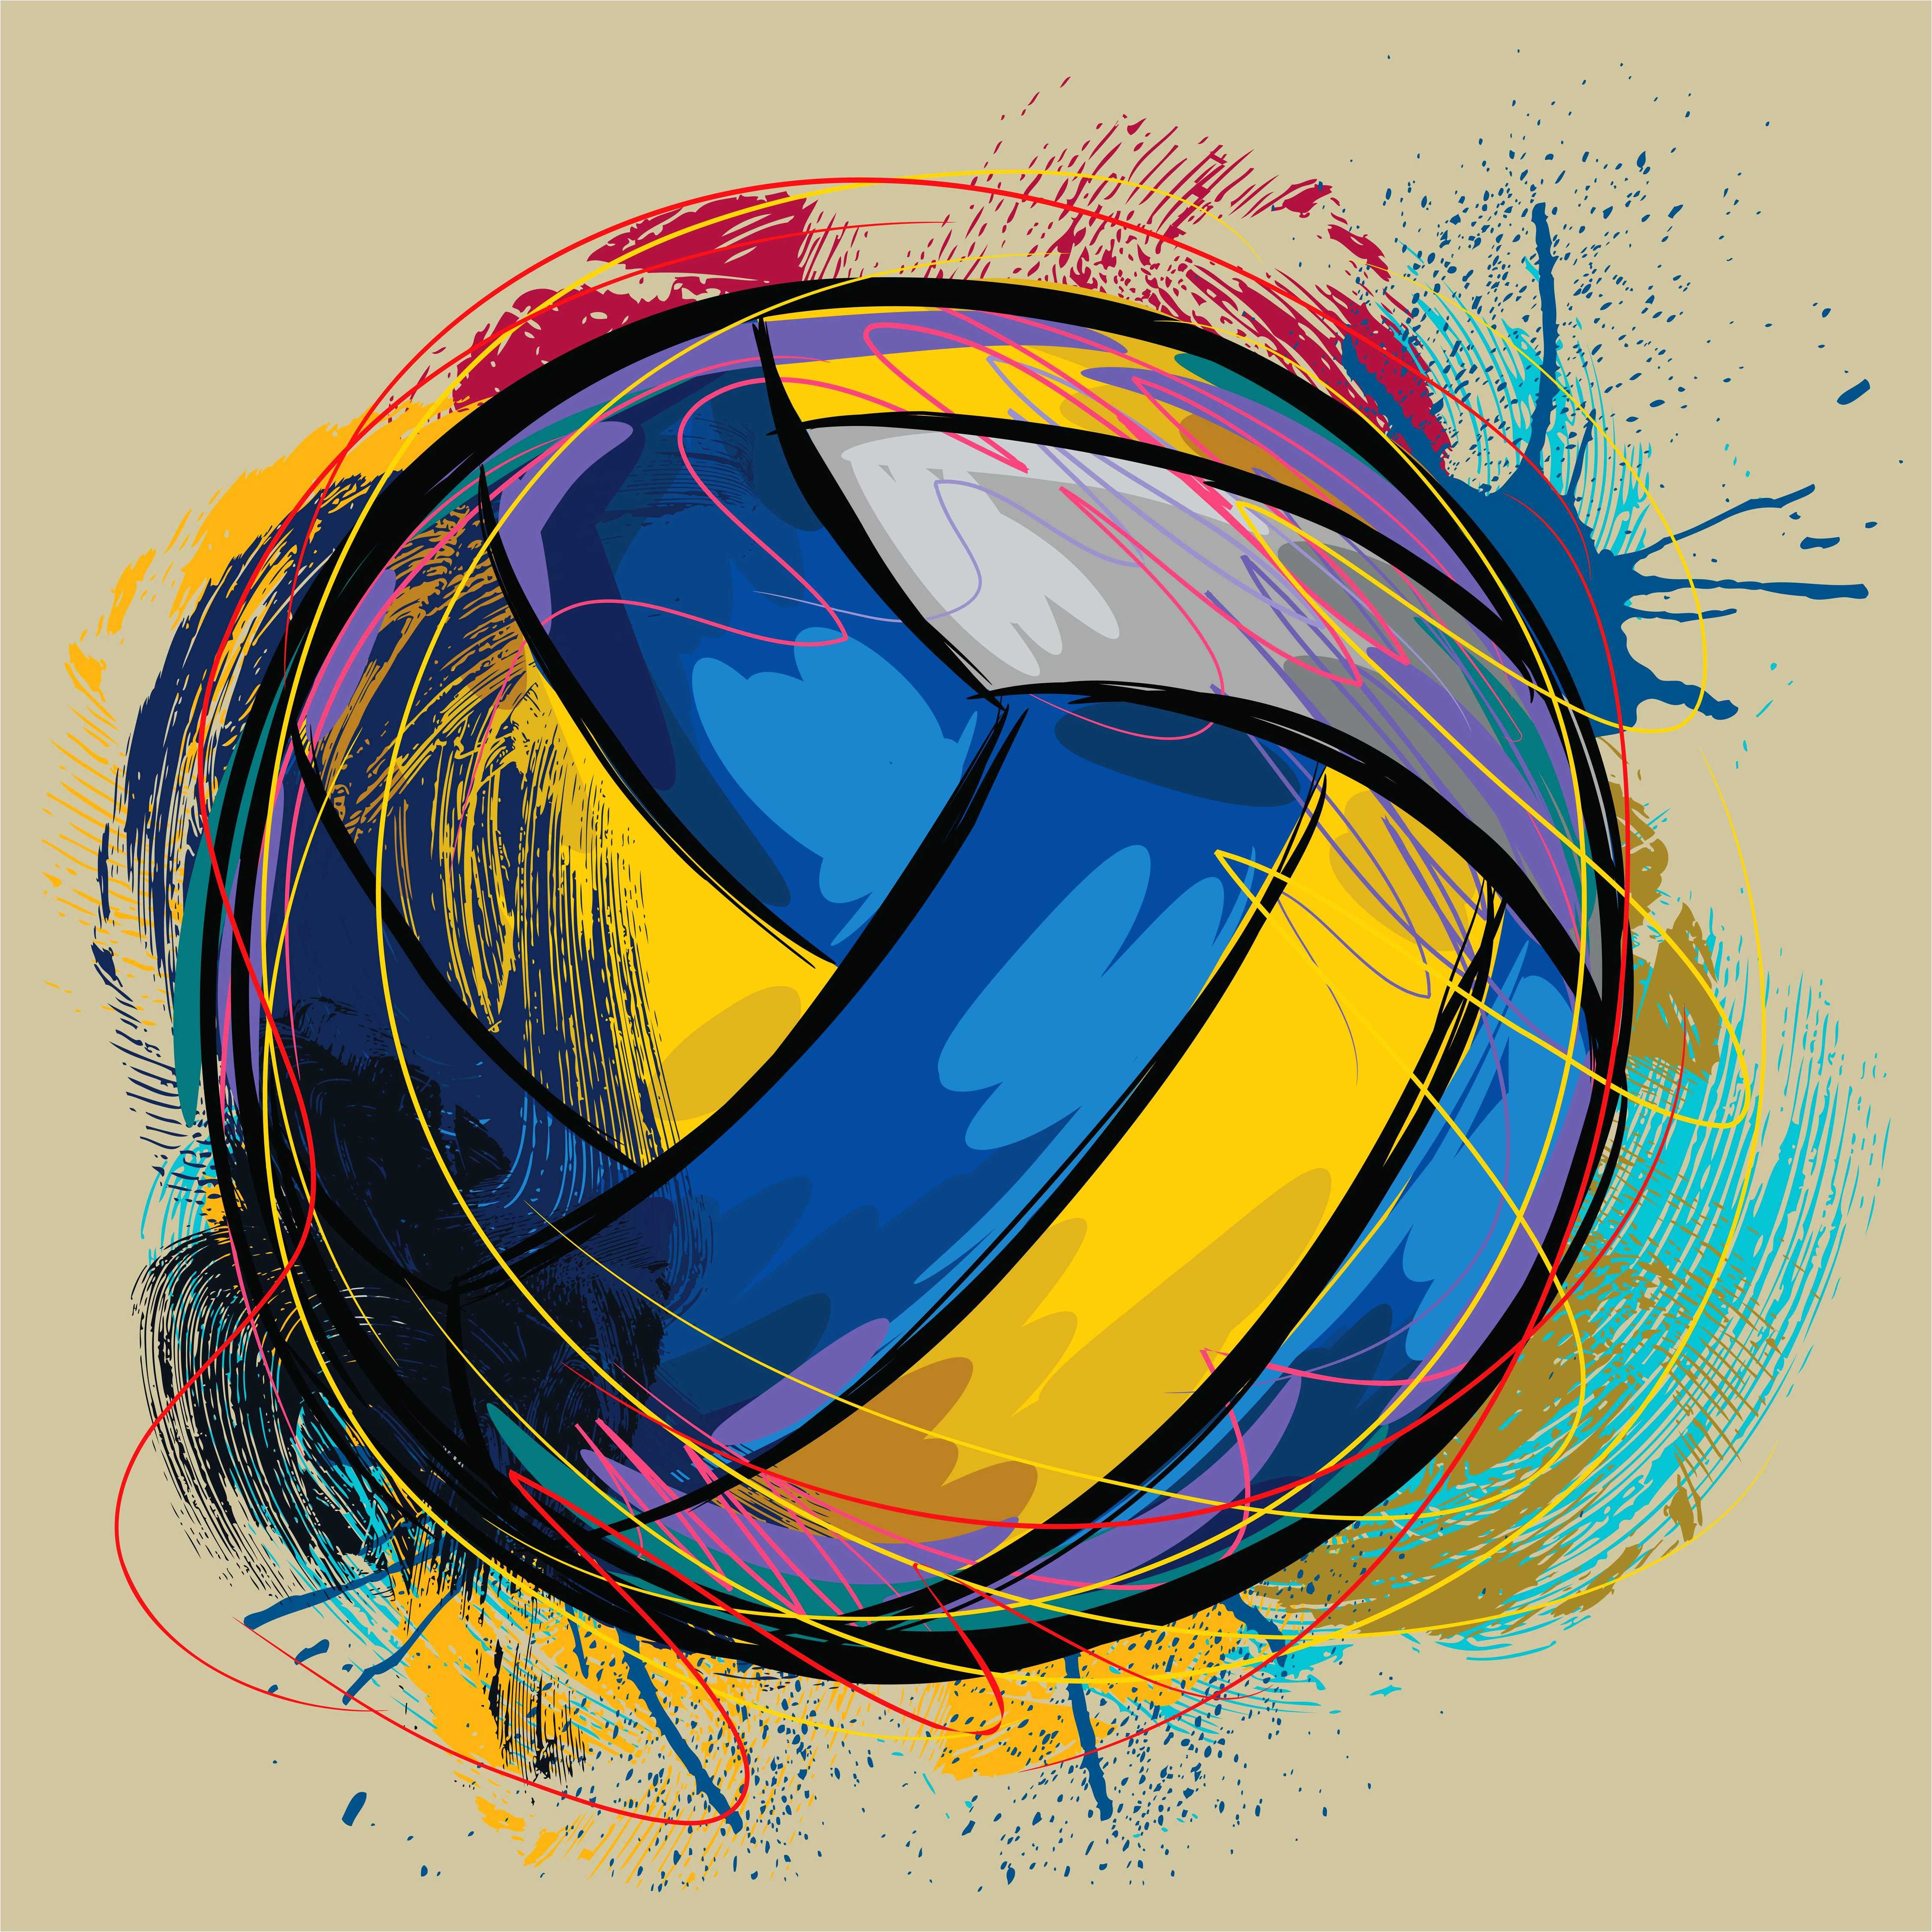 Free Volleyball For Iphone Wallpaper, Volleyball For Iphone Wallpaper  Download - WallpaperUse - 1